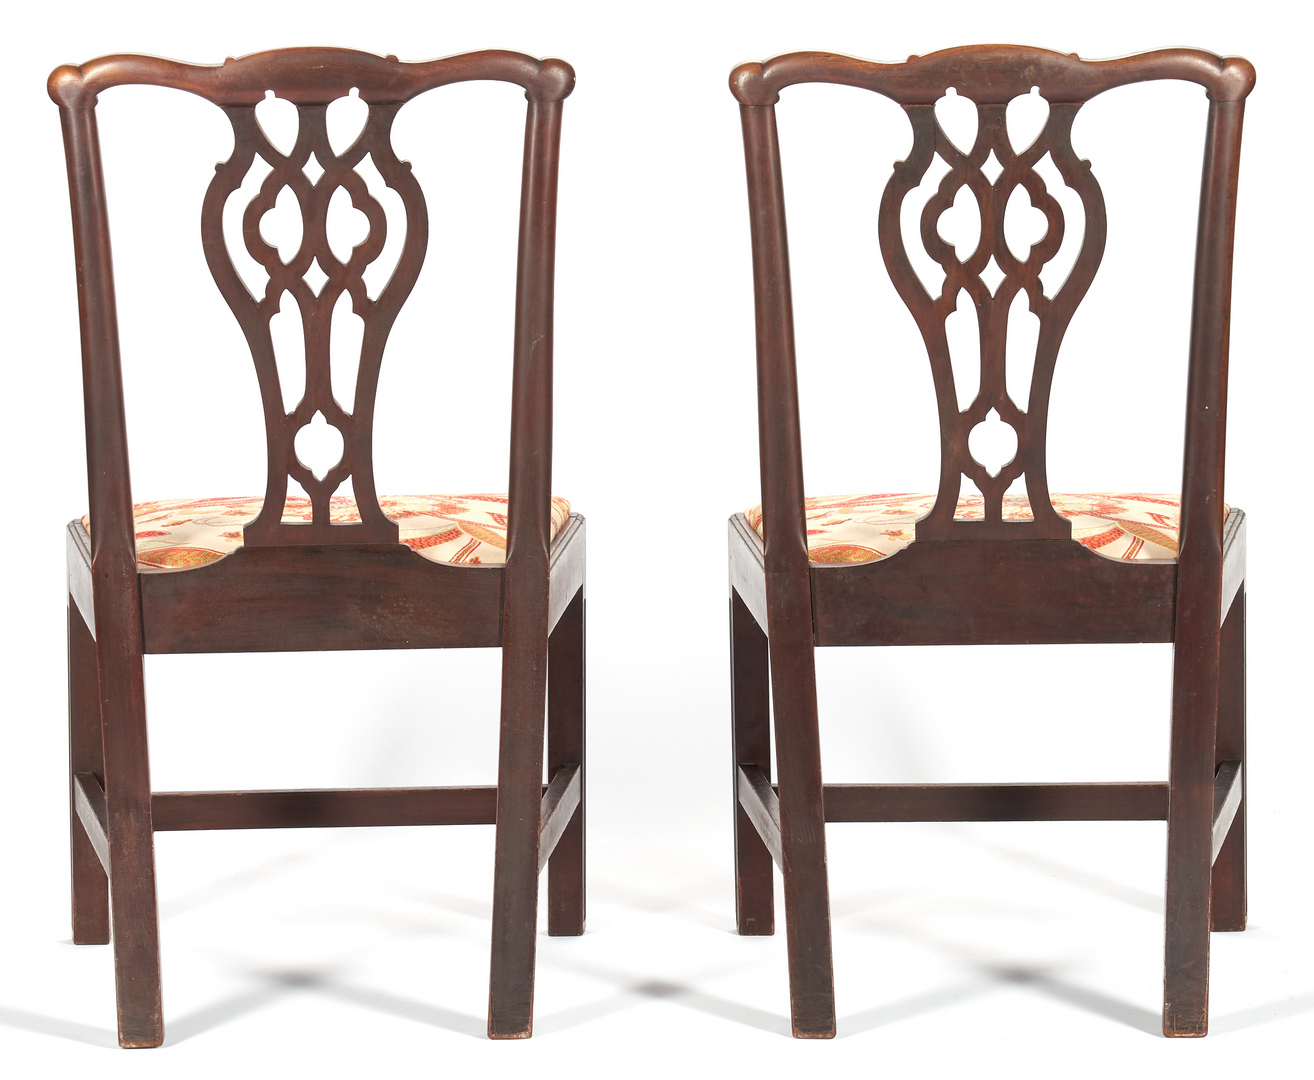 Lot 434: 4 Chippendale Style English Side Chairs